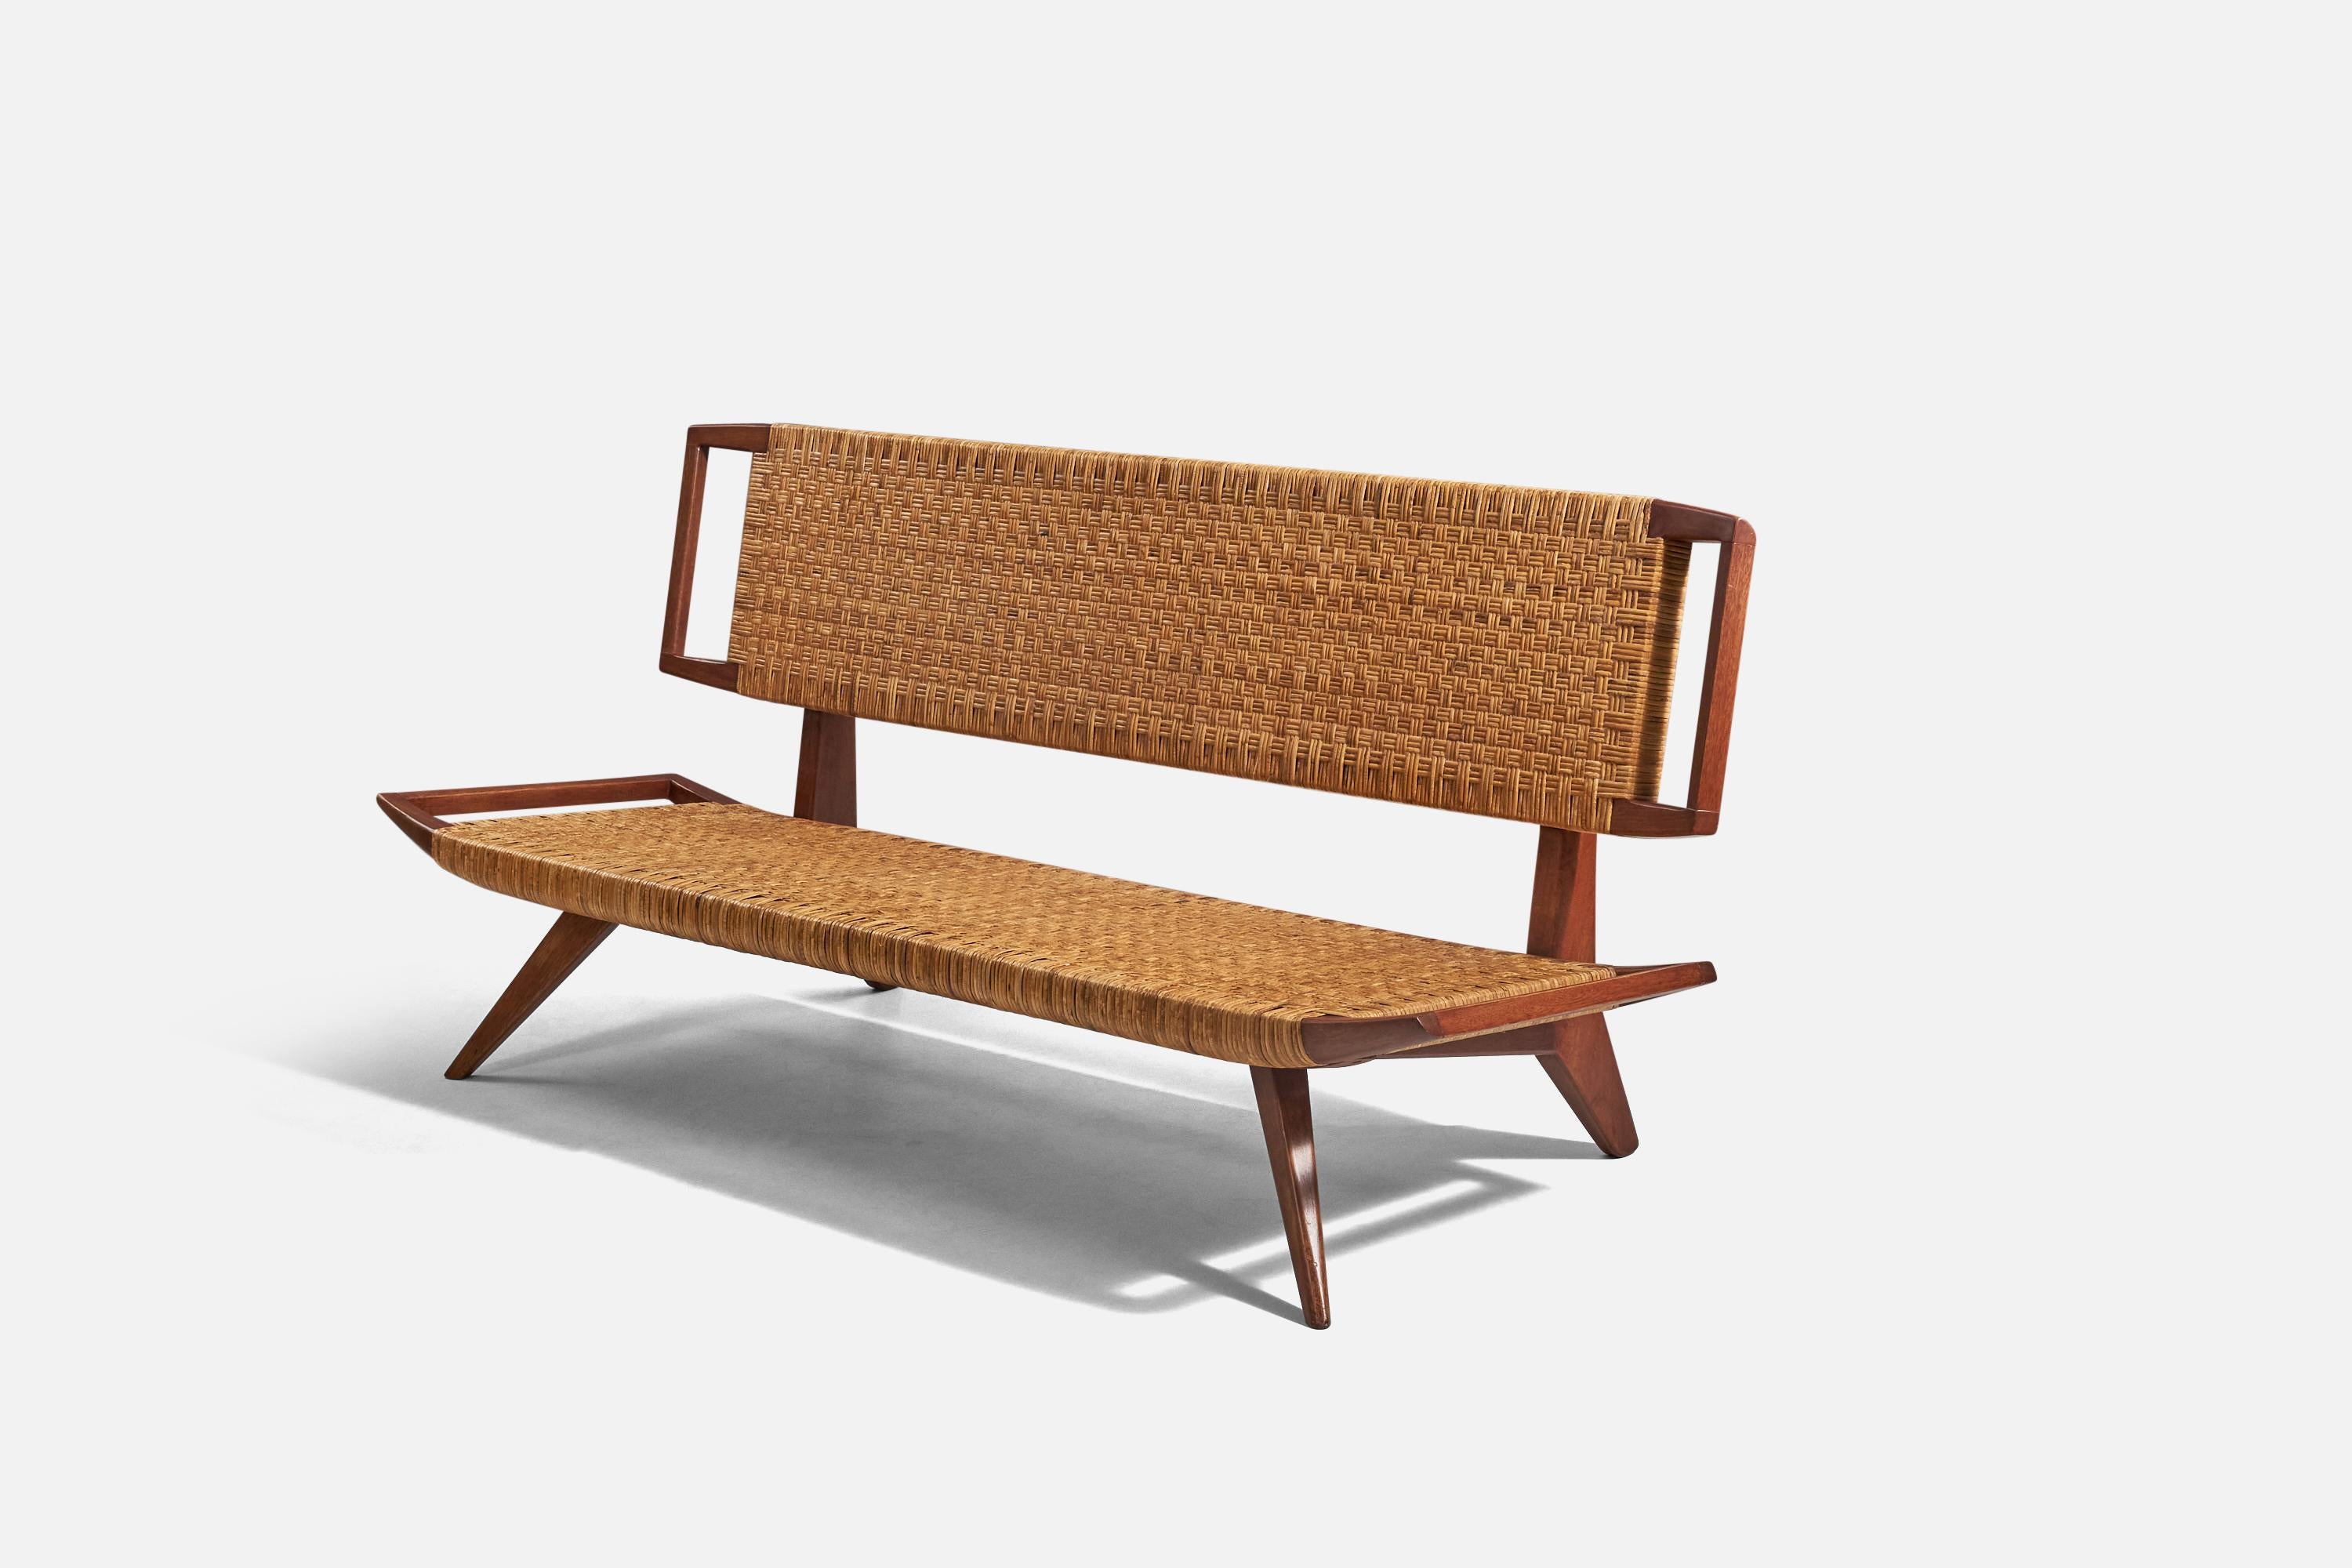 A mahogany and rattan bench designed by Paul László and produced by Glenn of California, USA, 1950s.